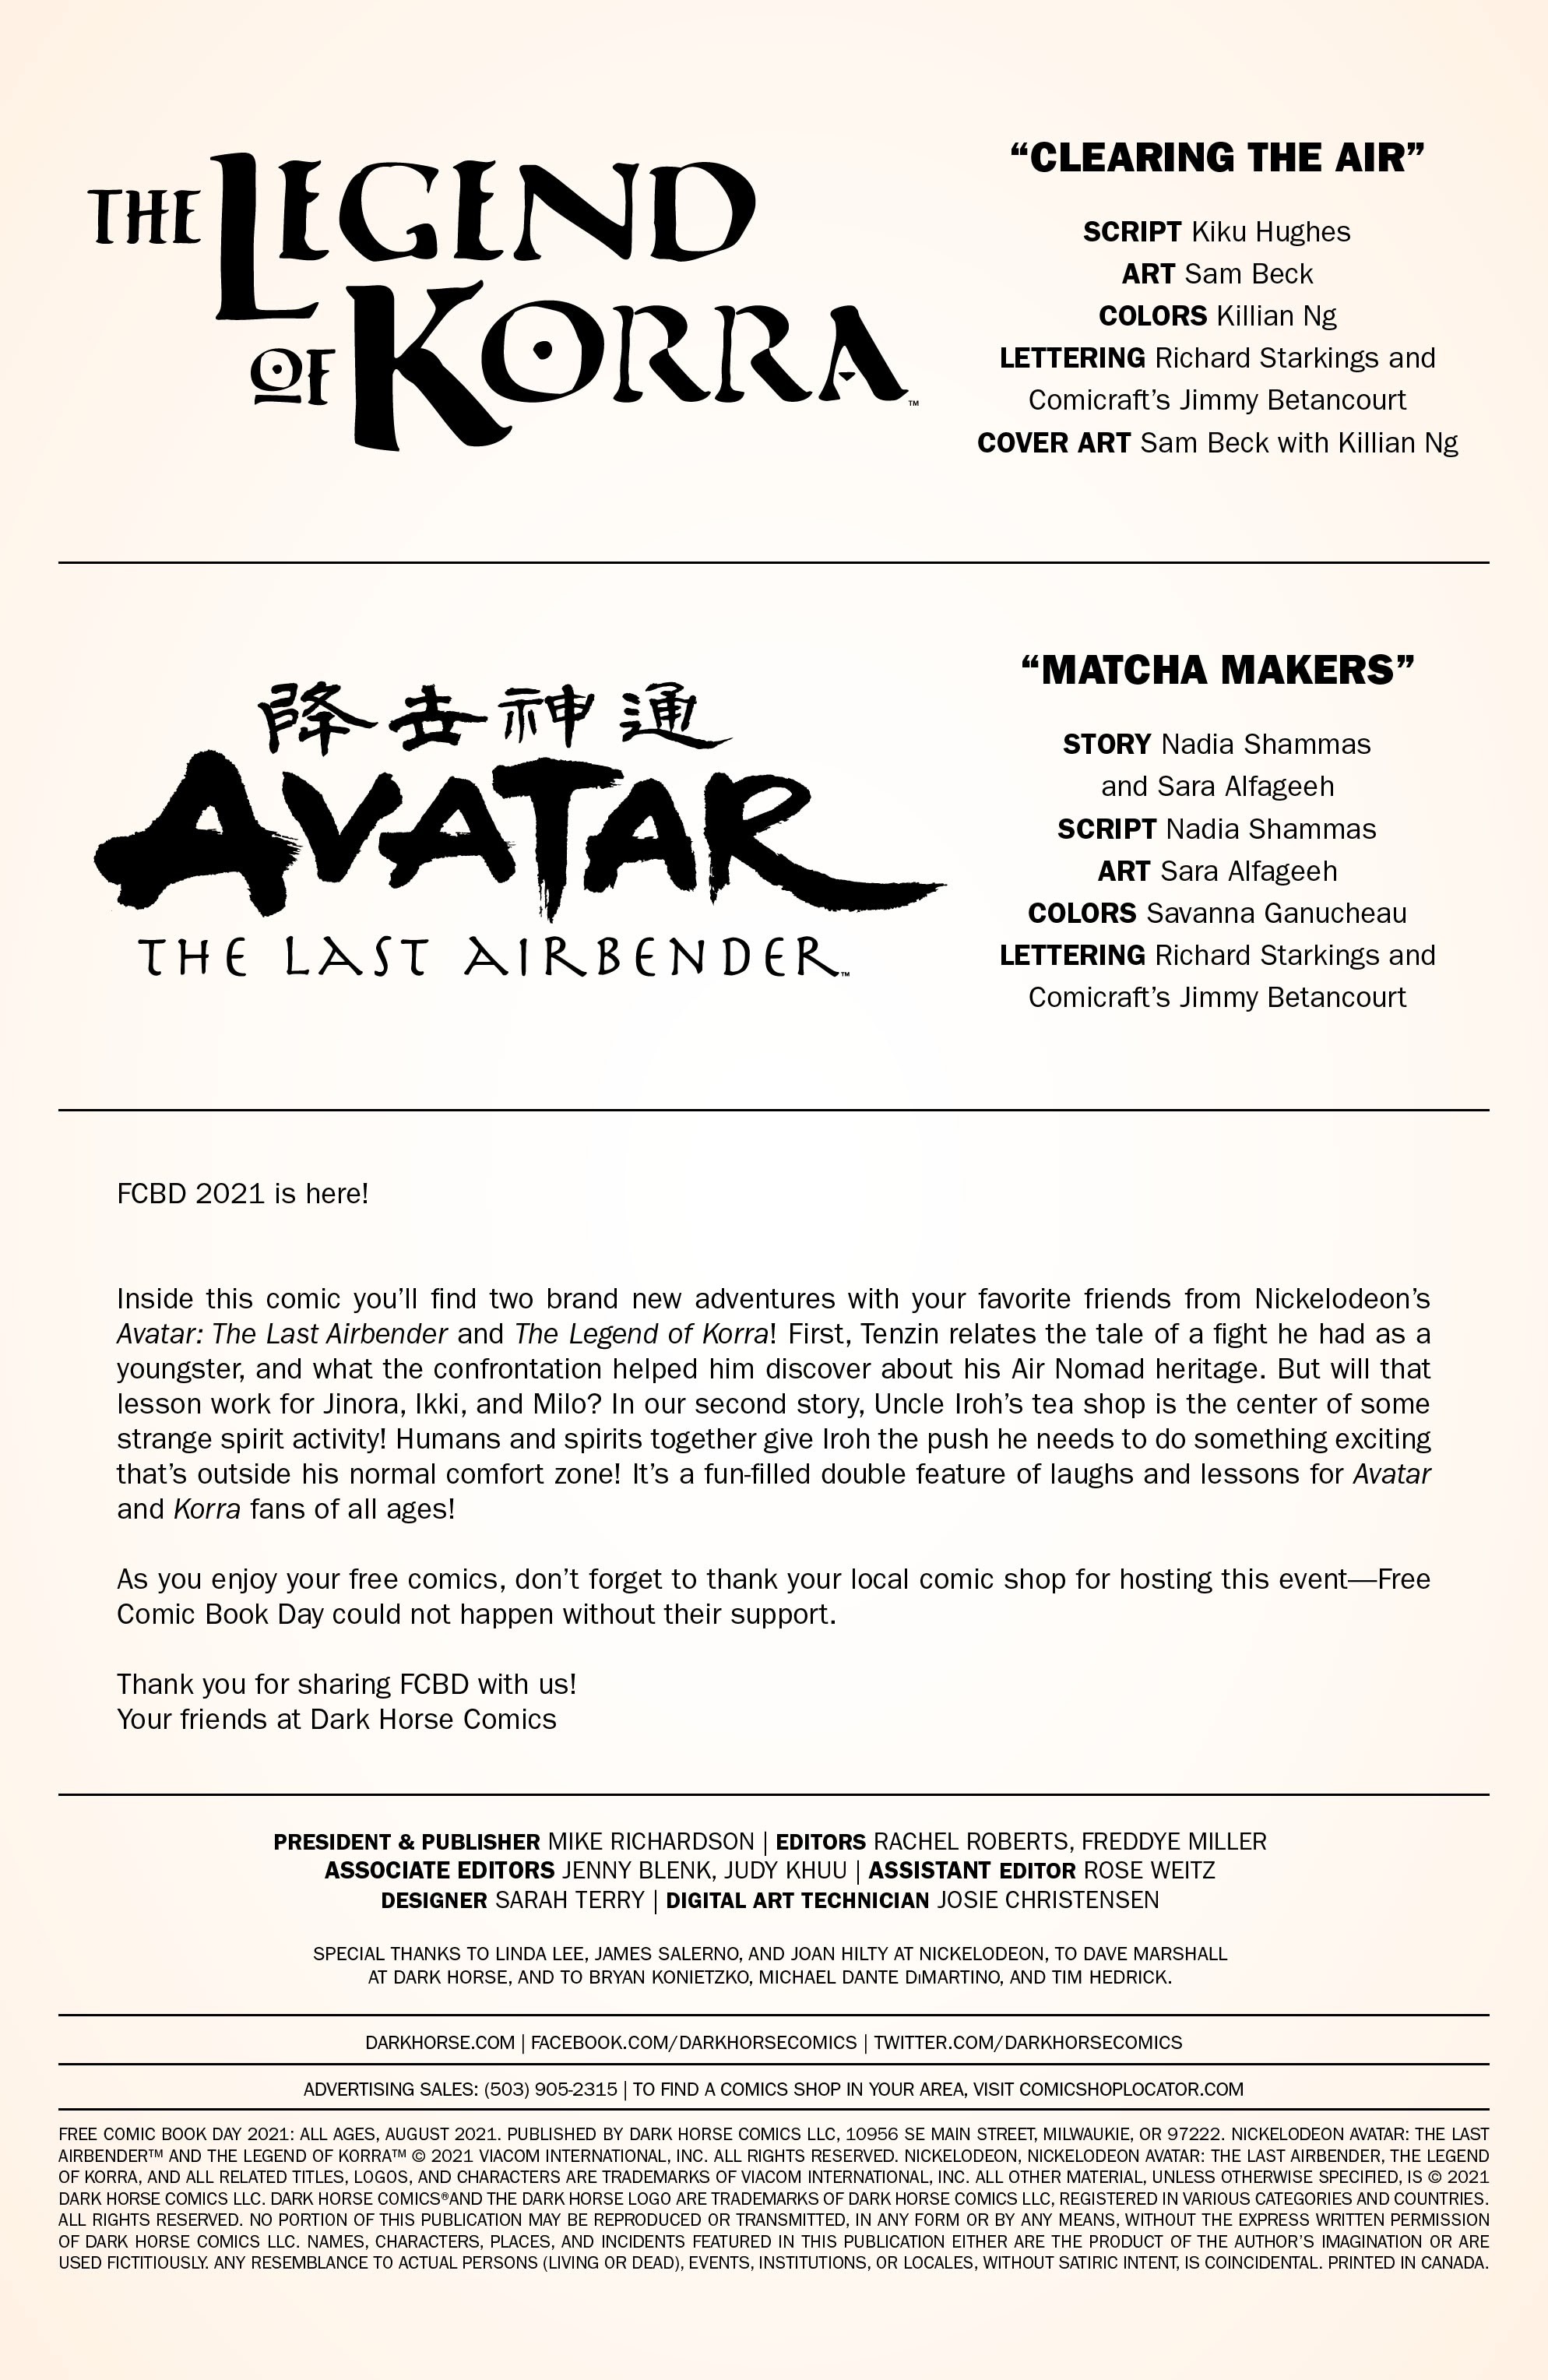 Read online Free Comic Book Day 2021 comic -  Issue # Avatar - The Last Airbender - The Legend of Korra - 2